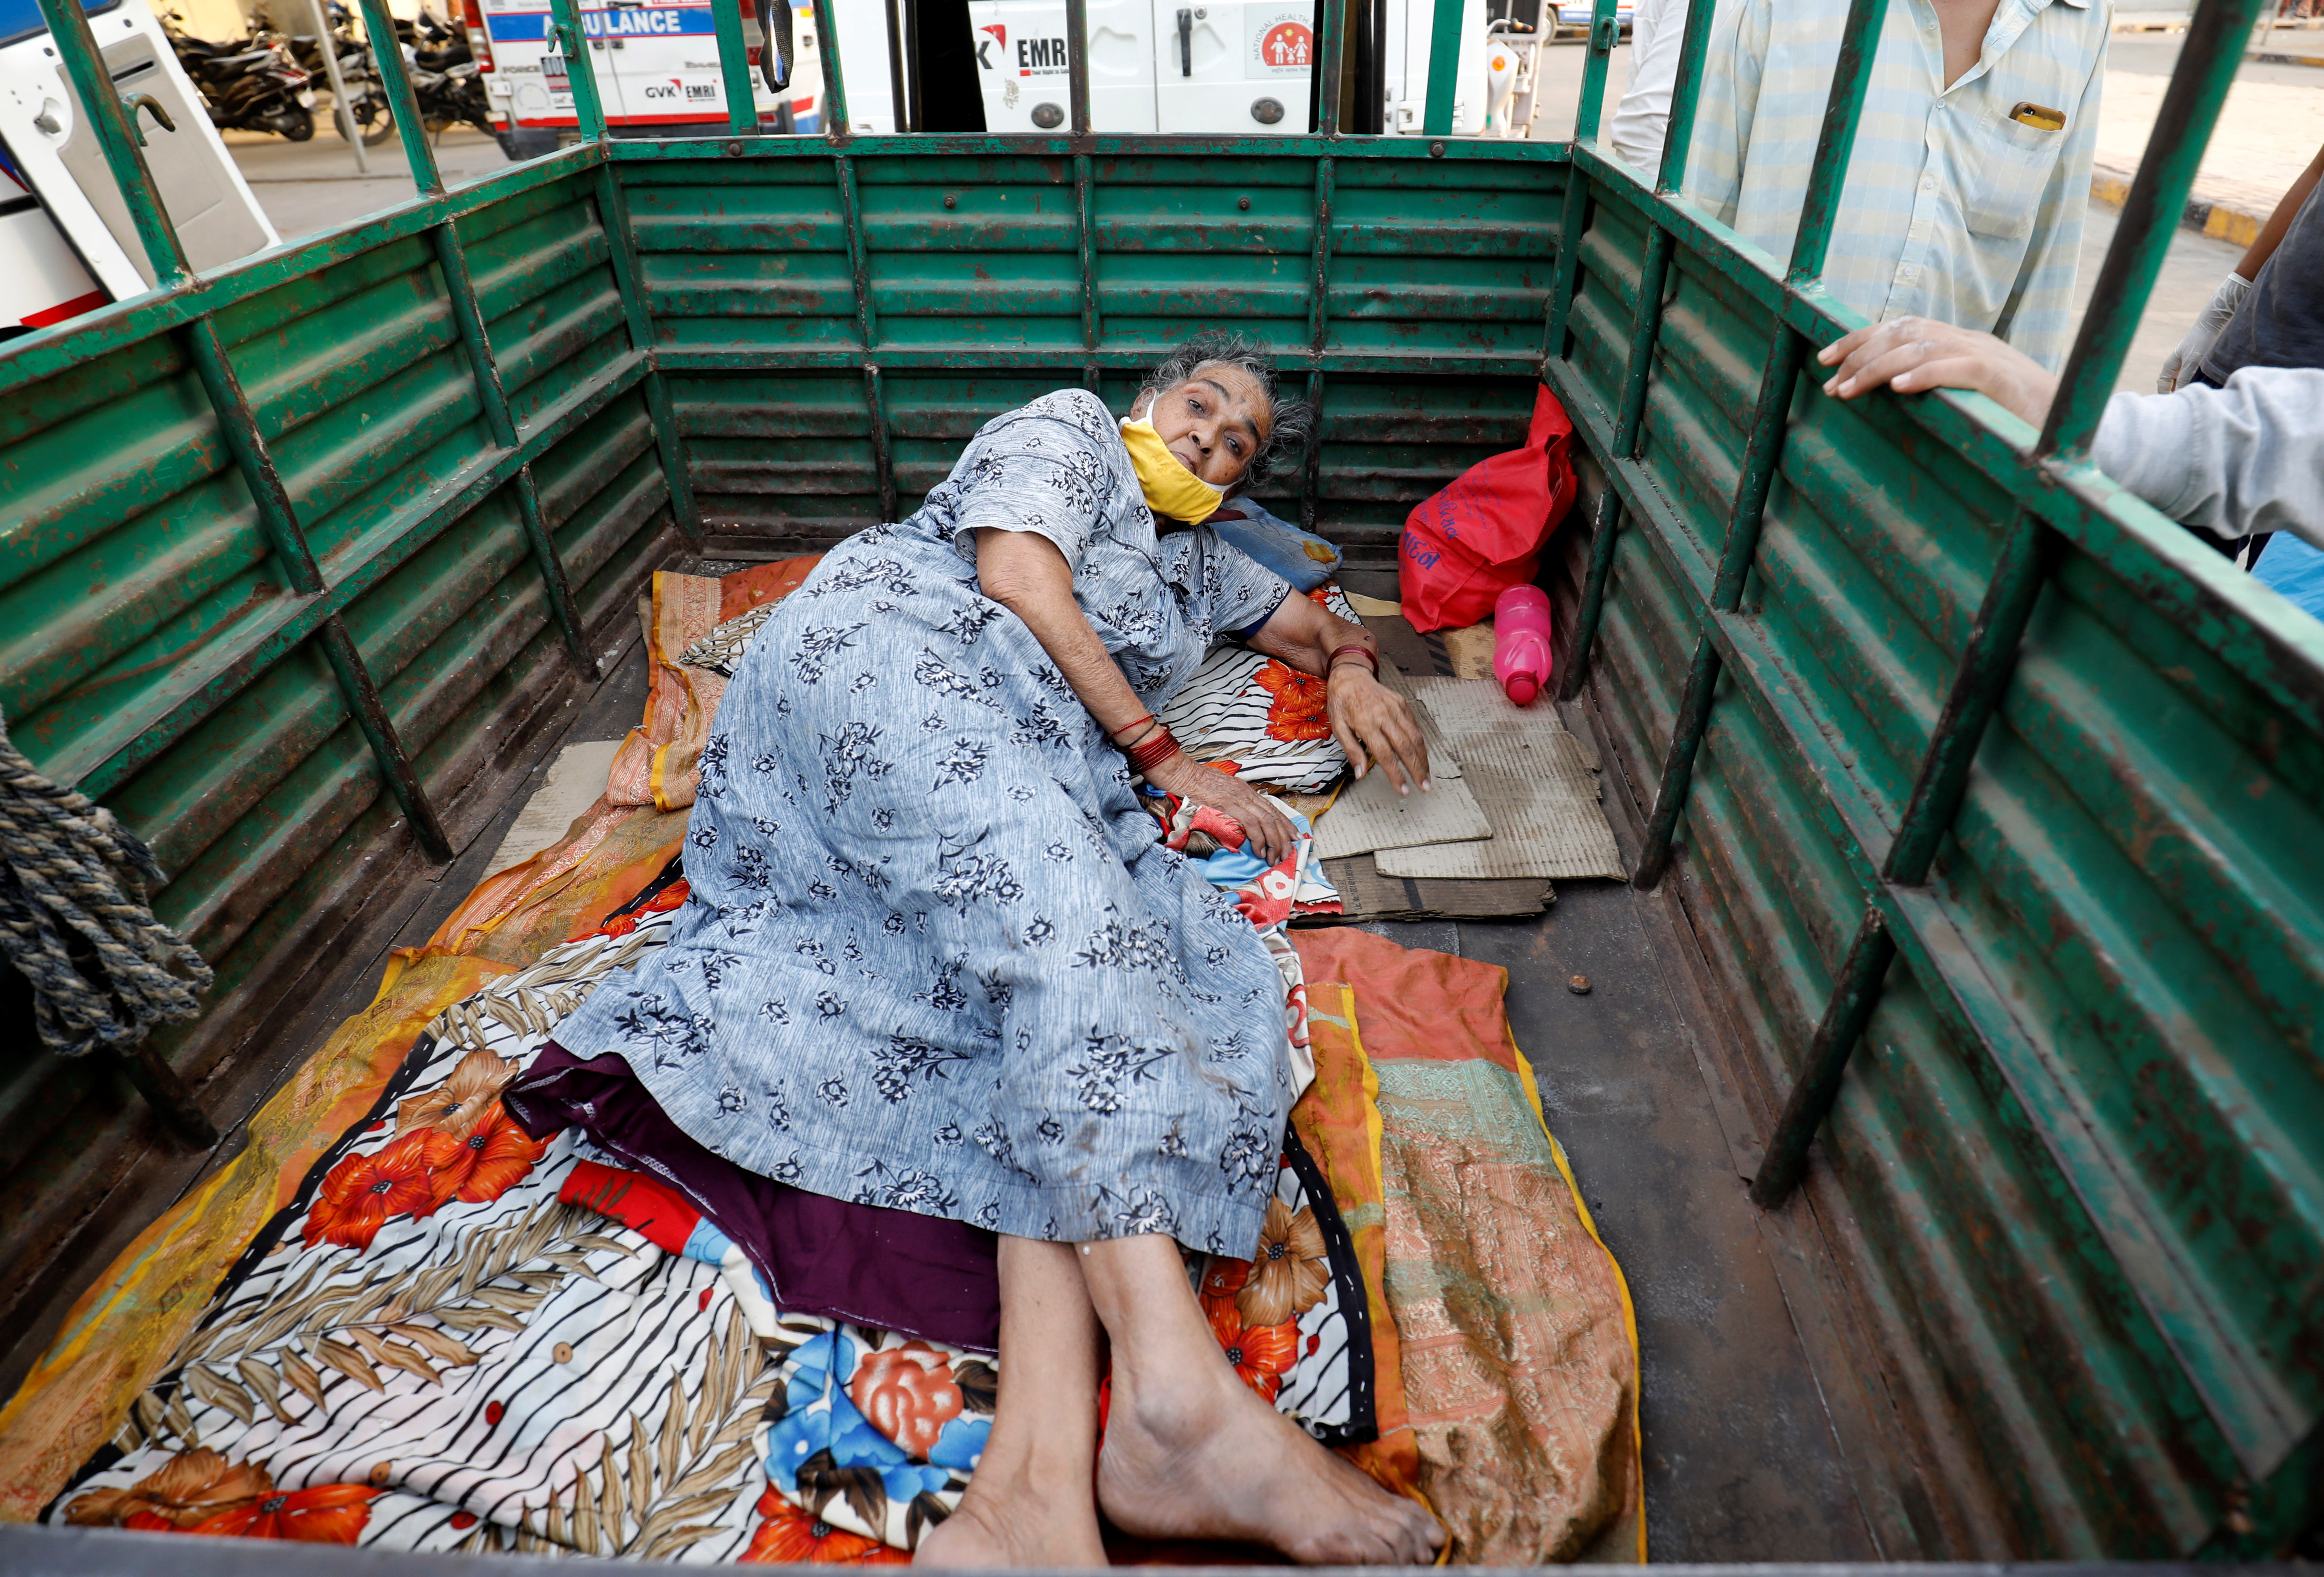 Woman lies in the back of a load carrier waiting to enter a COVID-19 hospital for treatment, in Ahmedabad